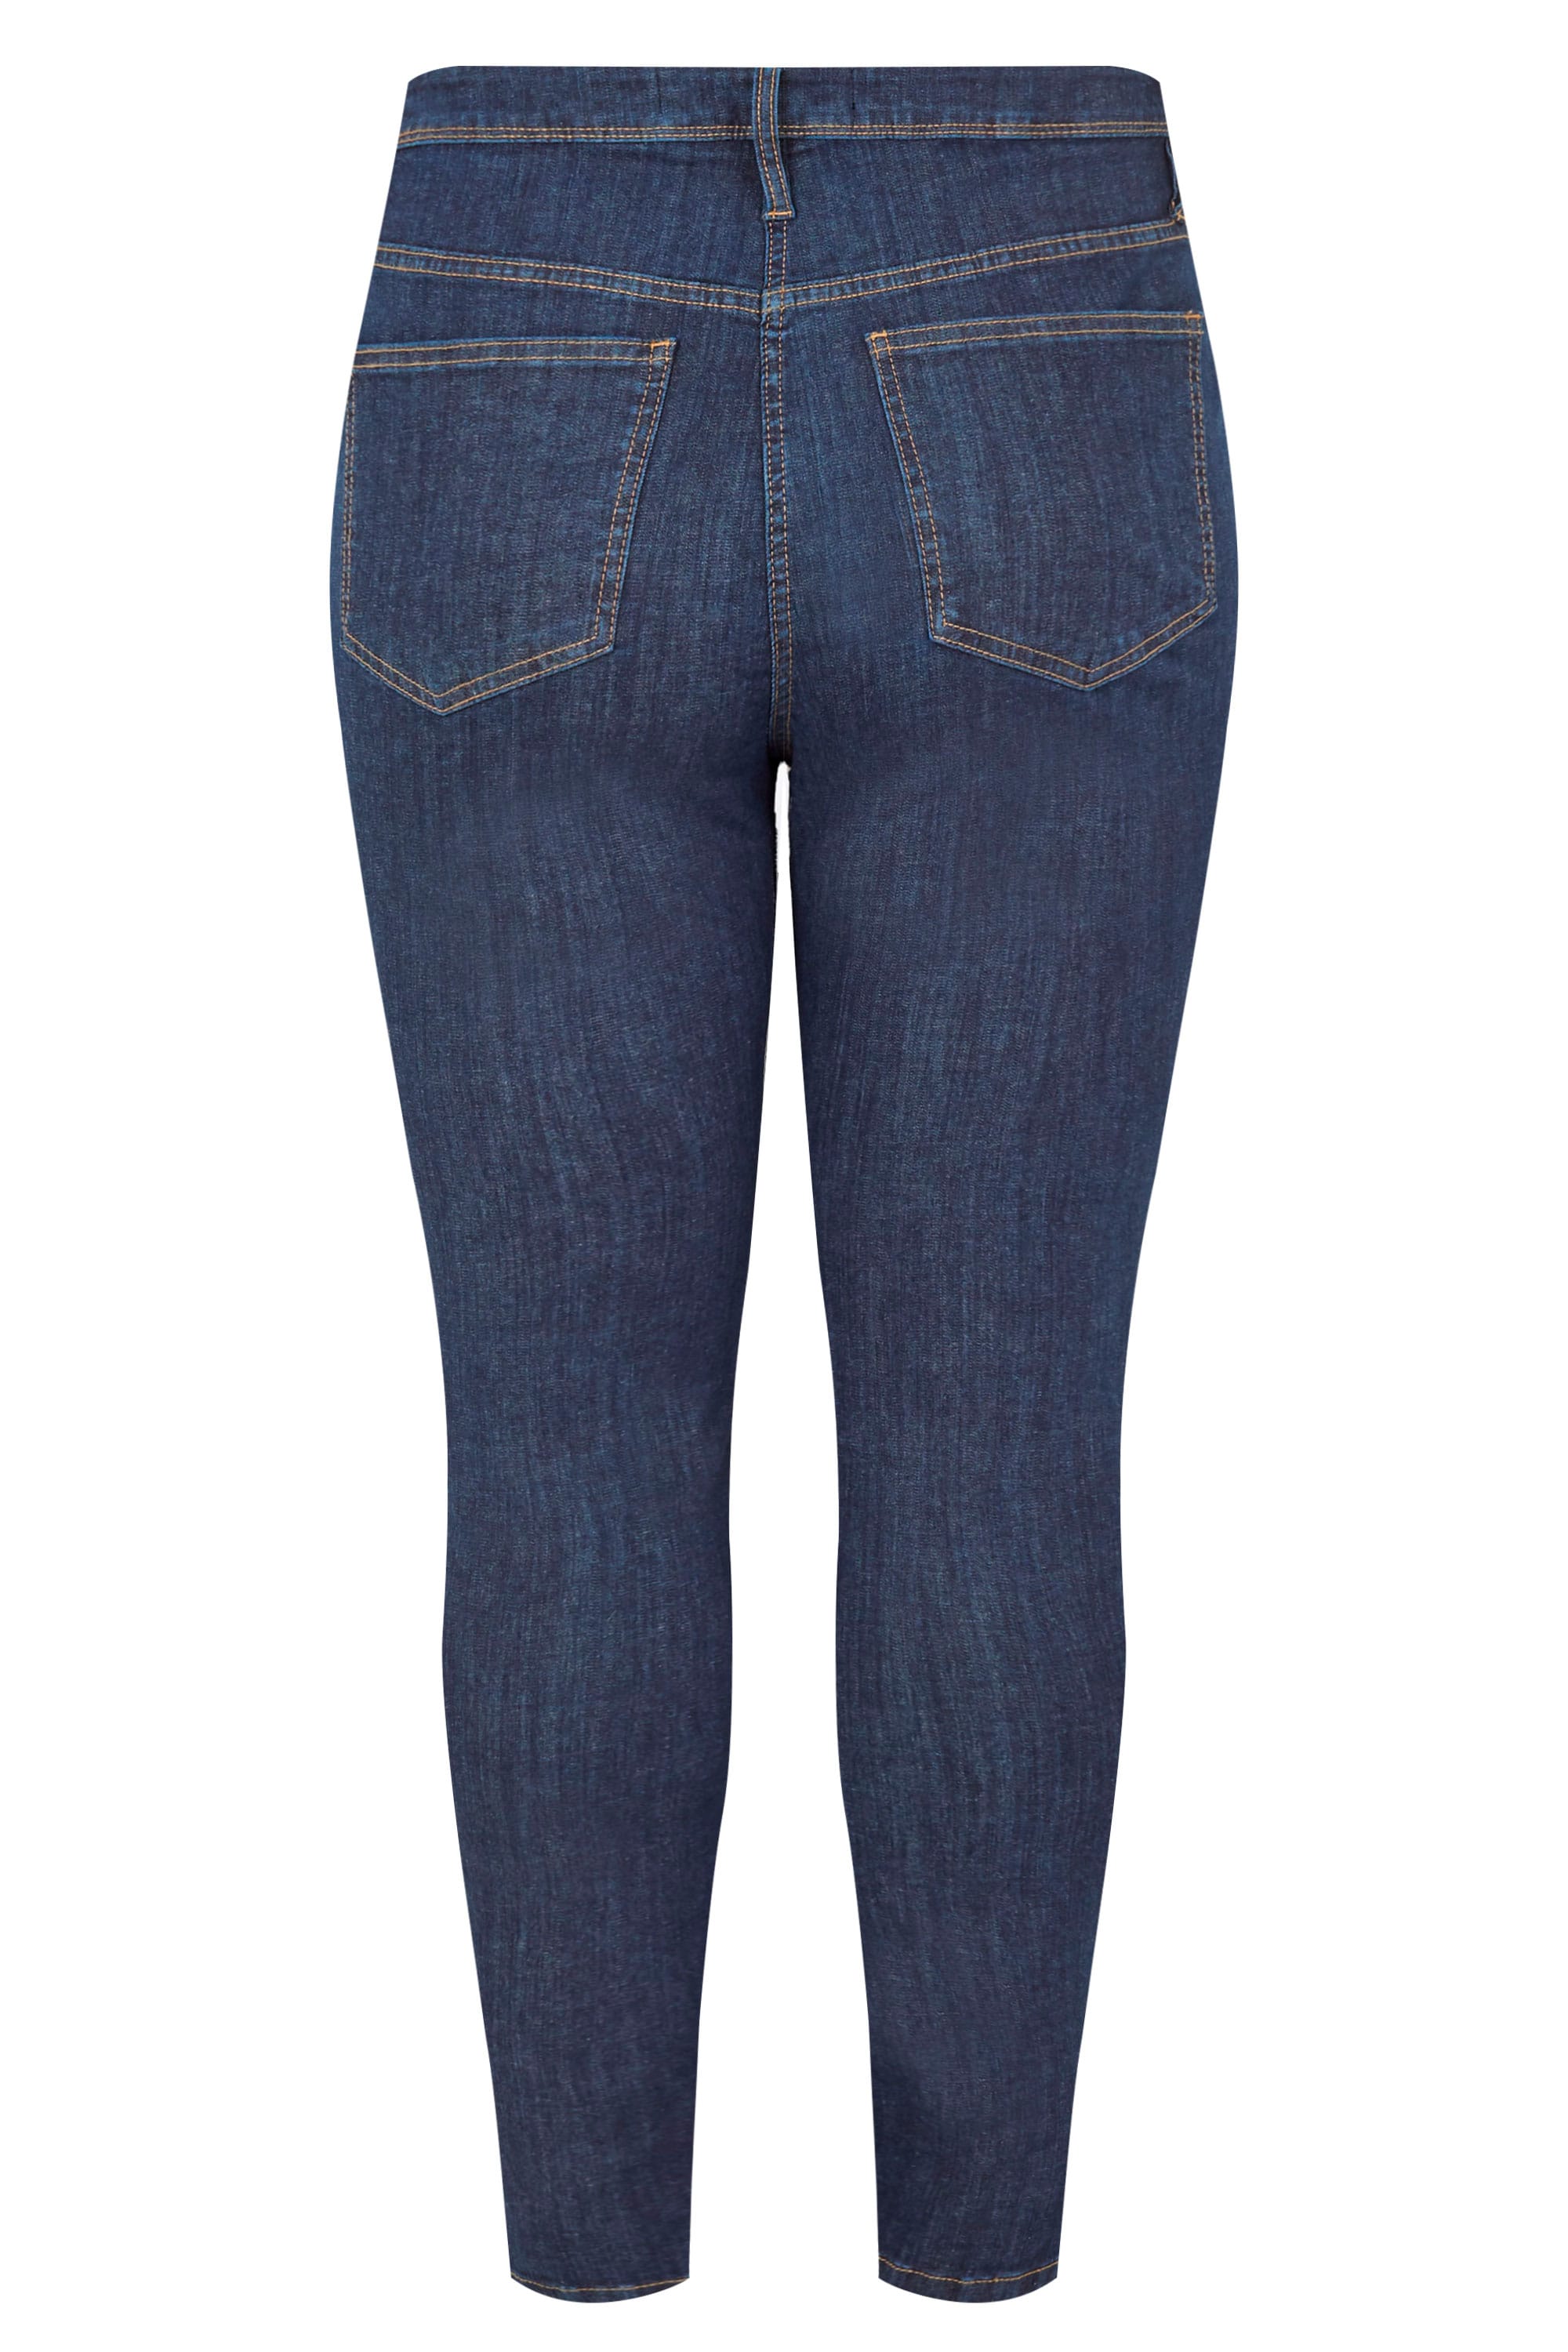 Indigo 'Luxe Control' Slim Leg Jeans, Plus size 16 to 36 | Yours Clothing